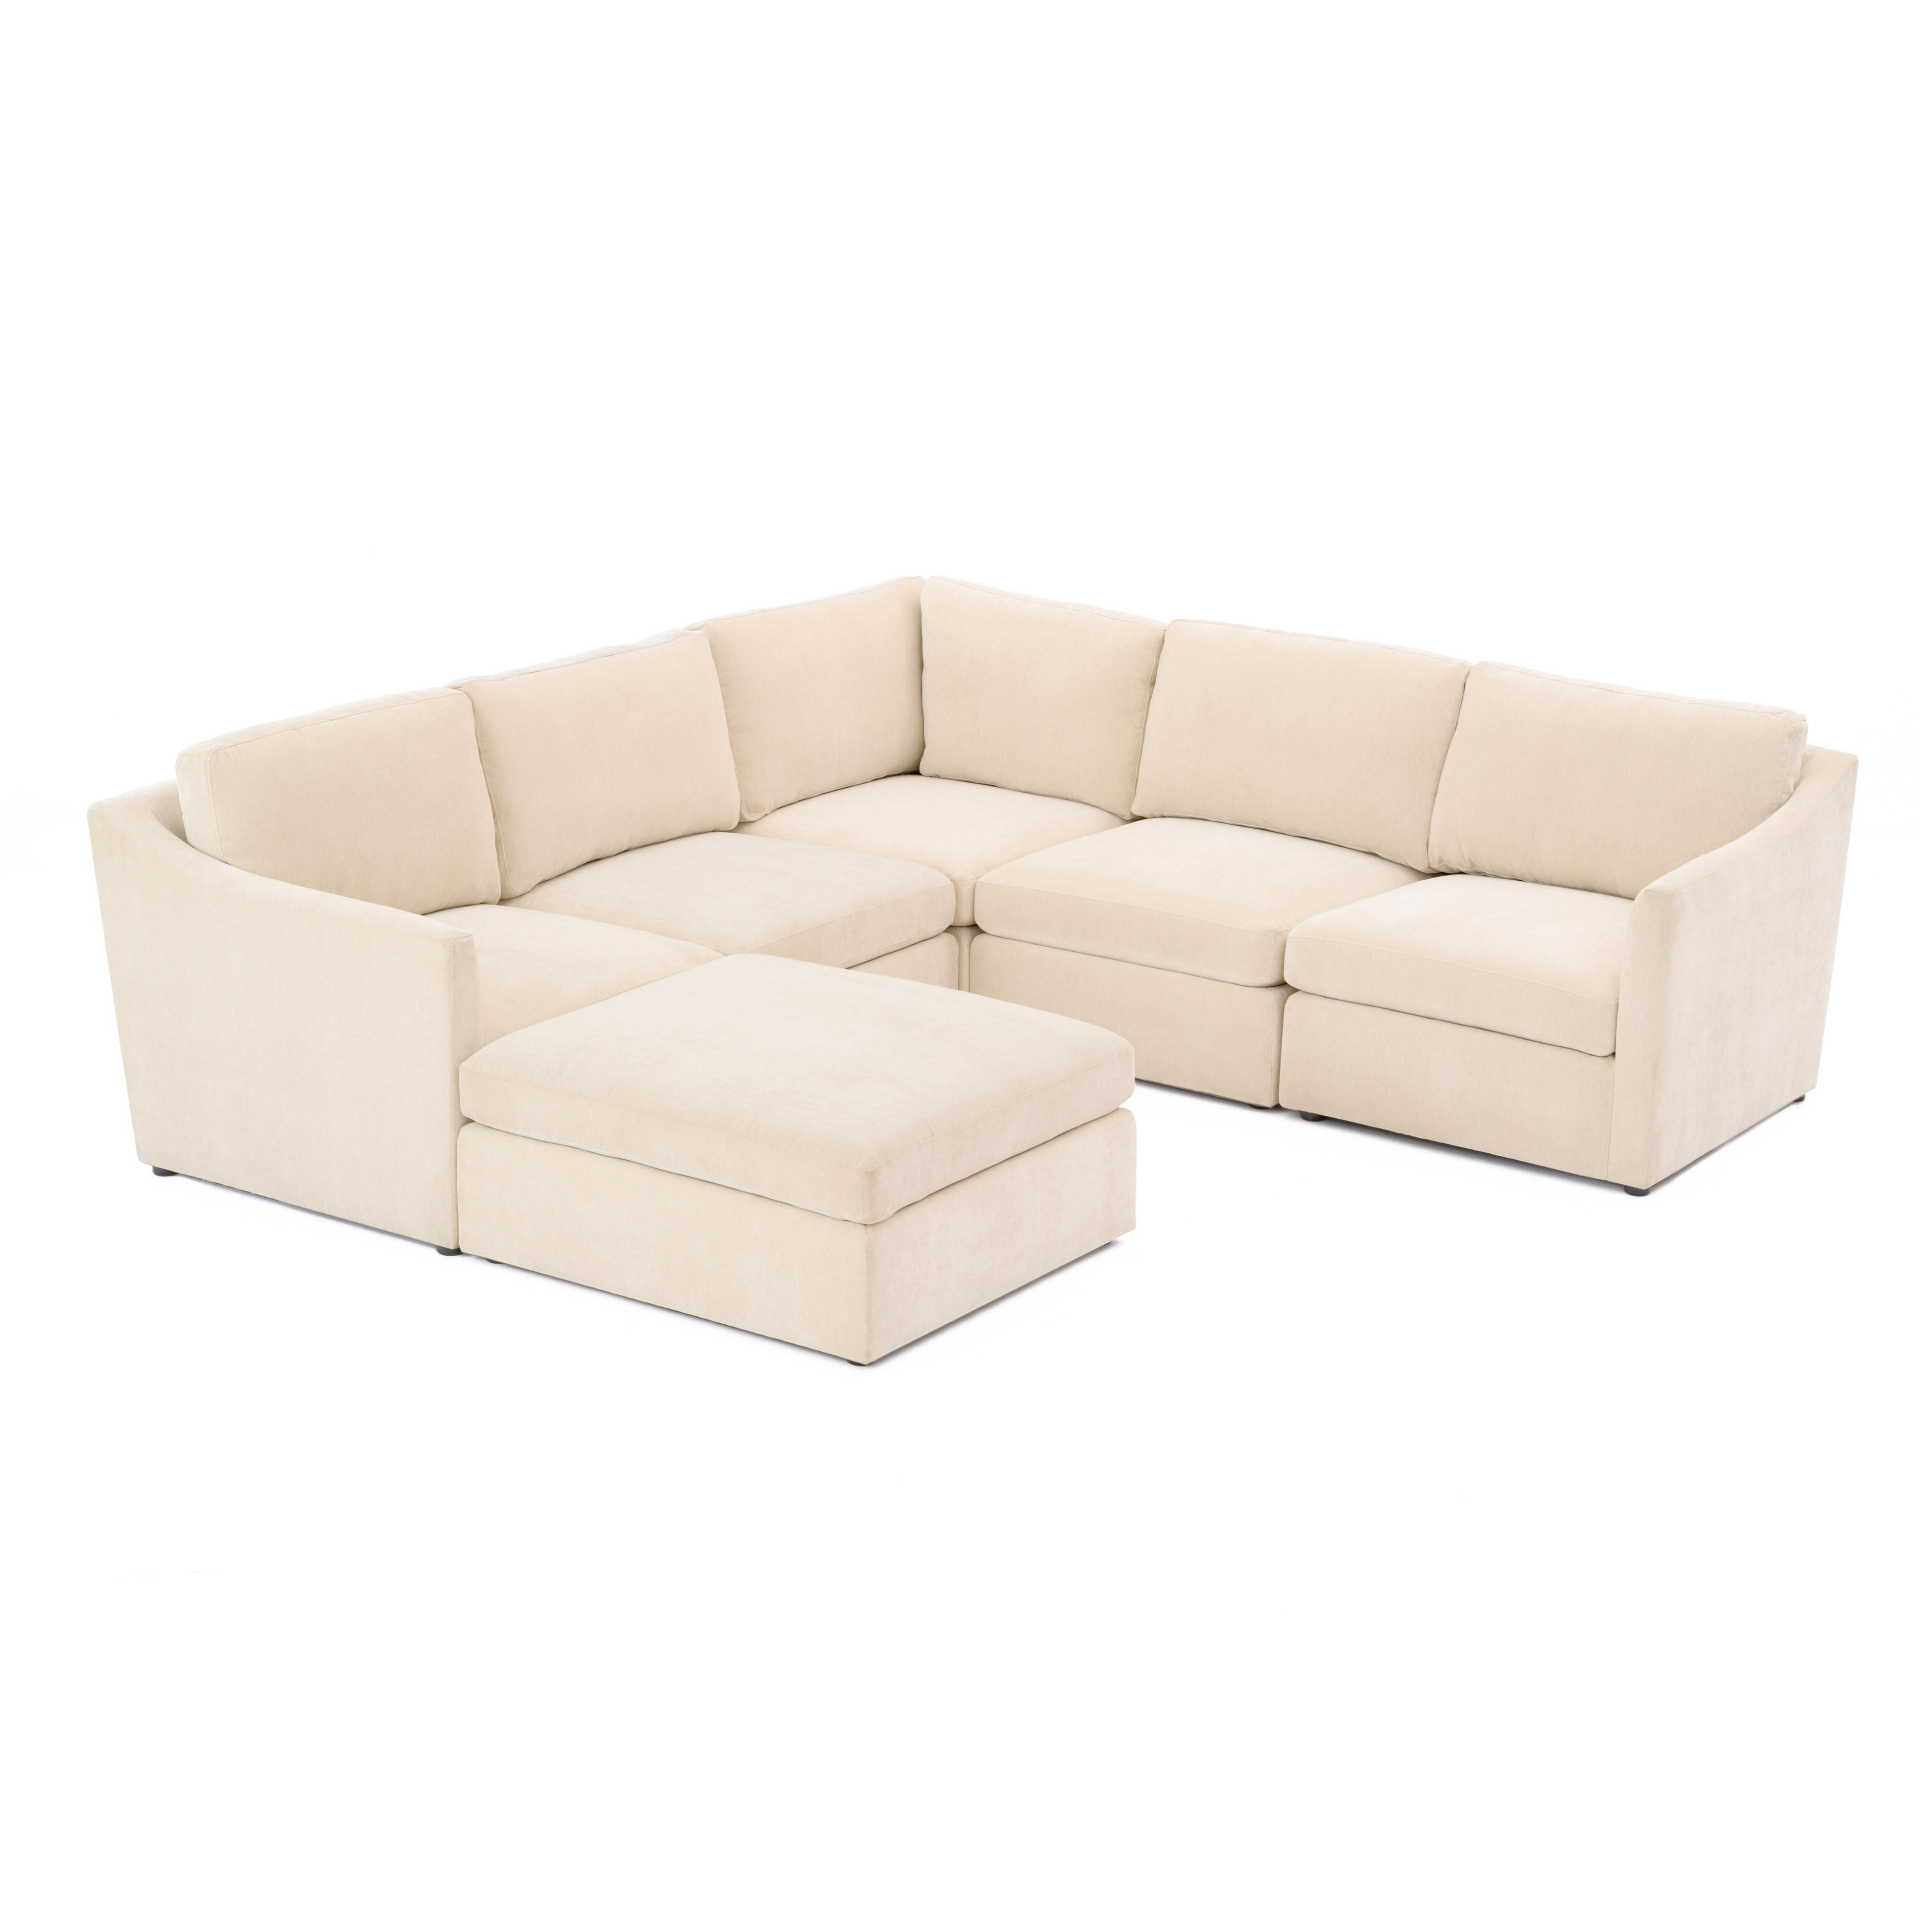 Aiden Beige Modular Chaise Sectional - Image 1